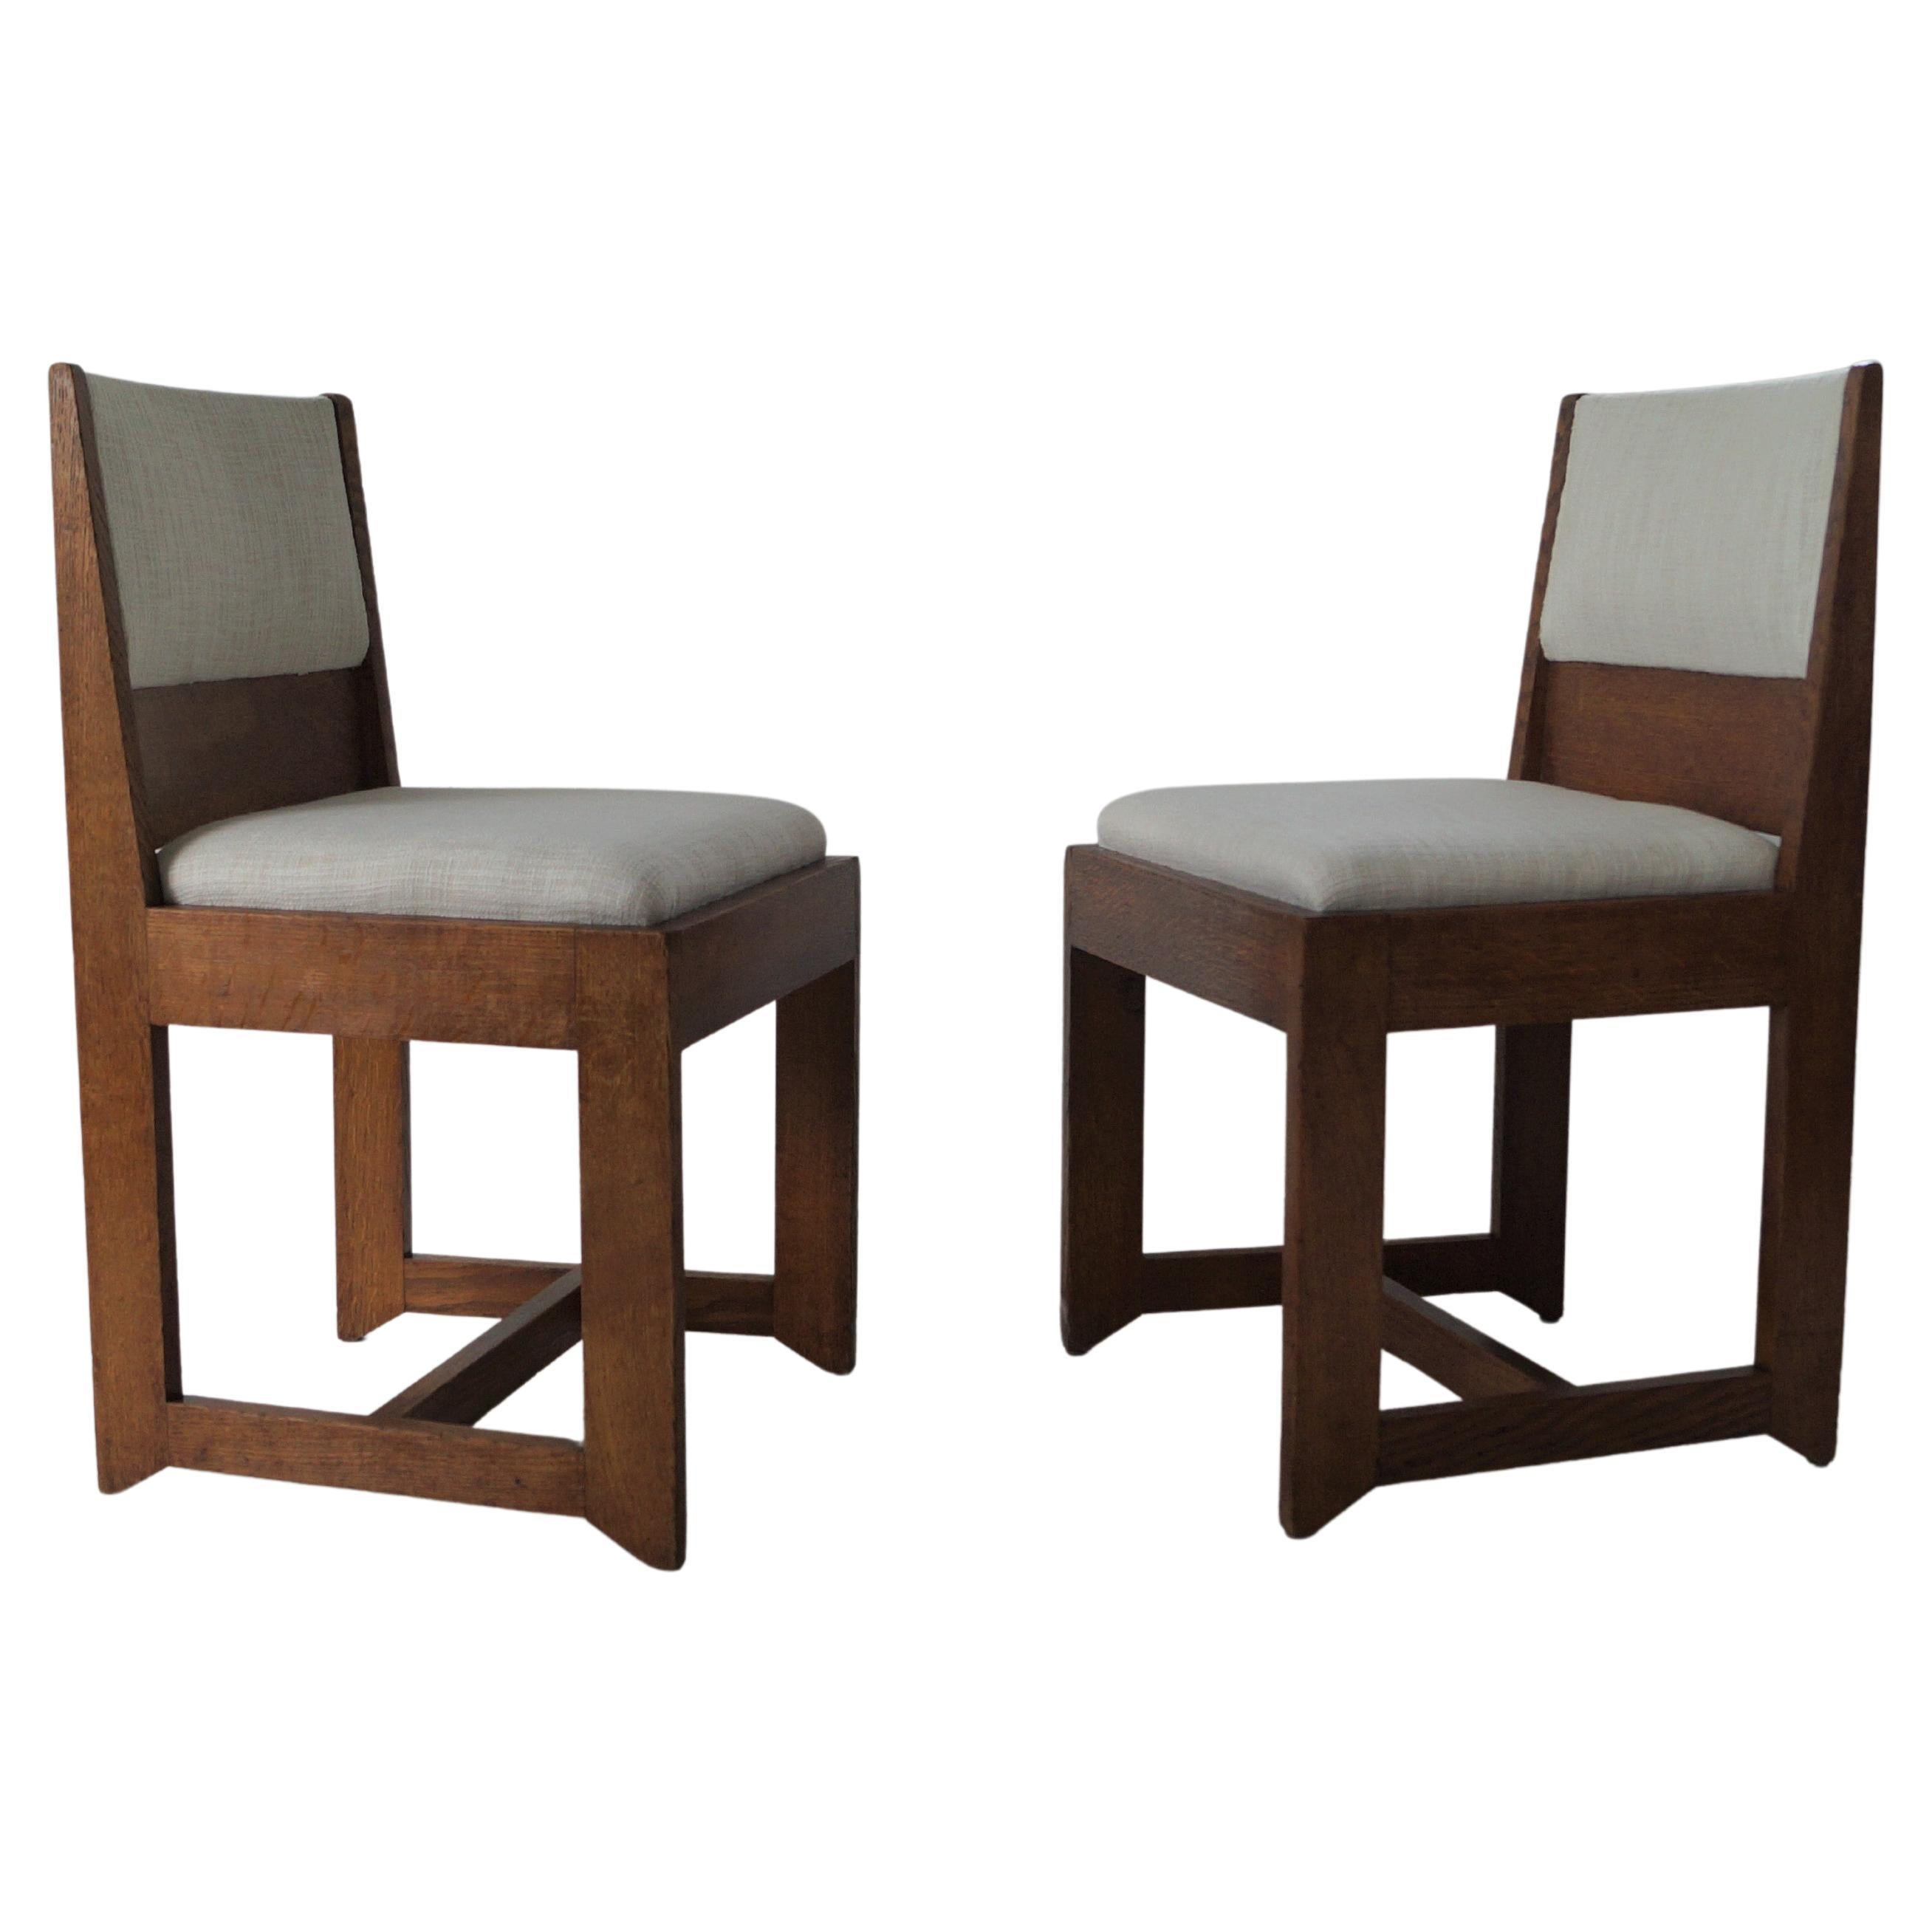 Dutch Art Deco Modernist set of chairs by H. Wouda for Pander, 1924 For Sale